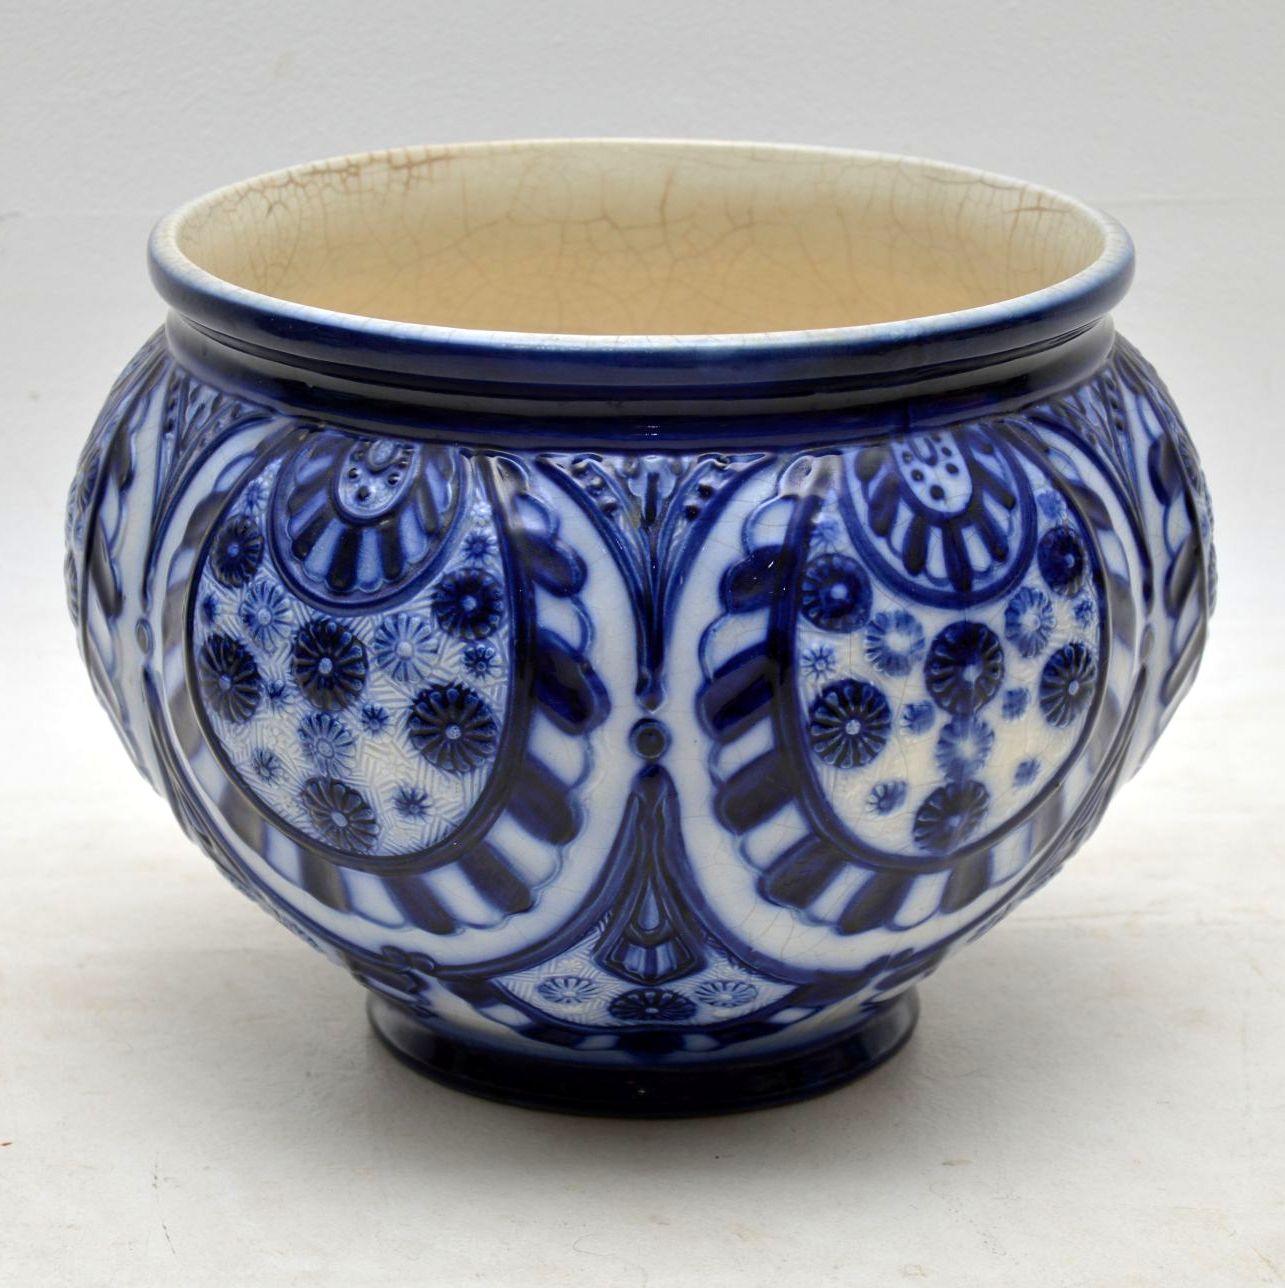 Large antique Victorian ceramic flower bowl in excellent condition. There is natural crazing inside, but no damage. This bowl has deep blue and white patterns all over with lots of embossings. I believe it dates to around the 1880-1890s